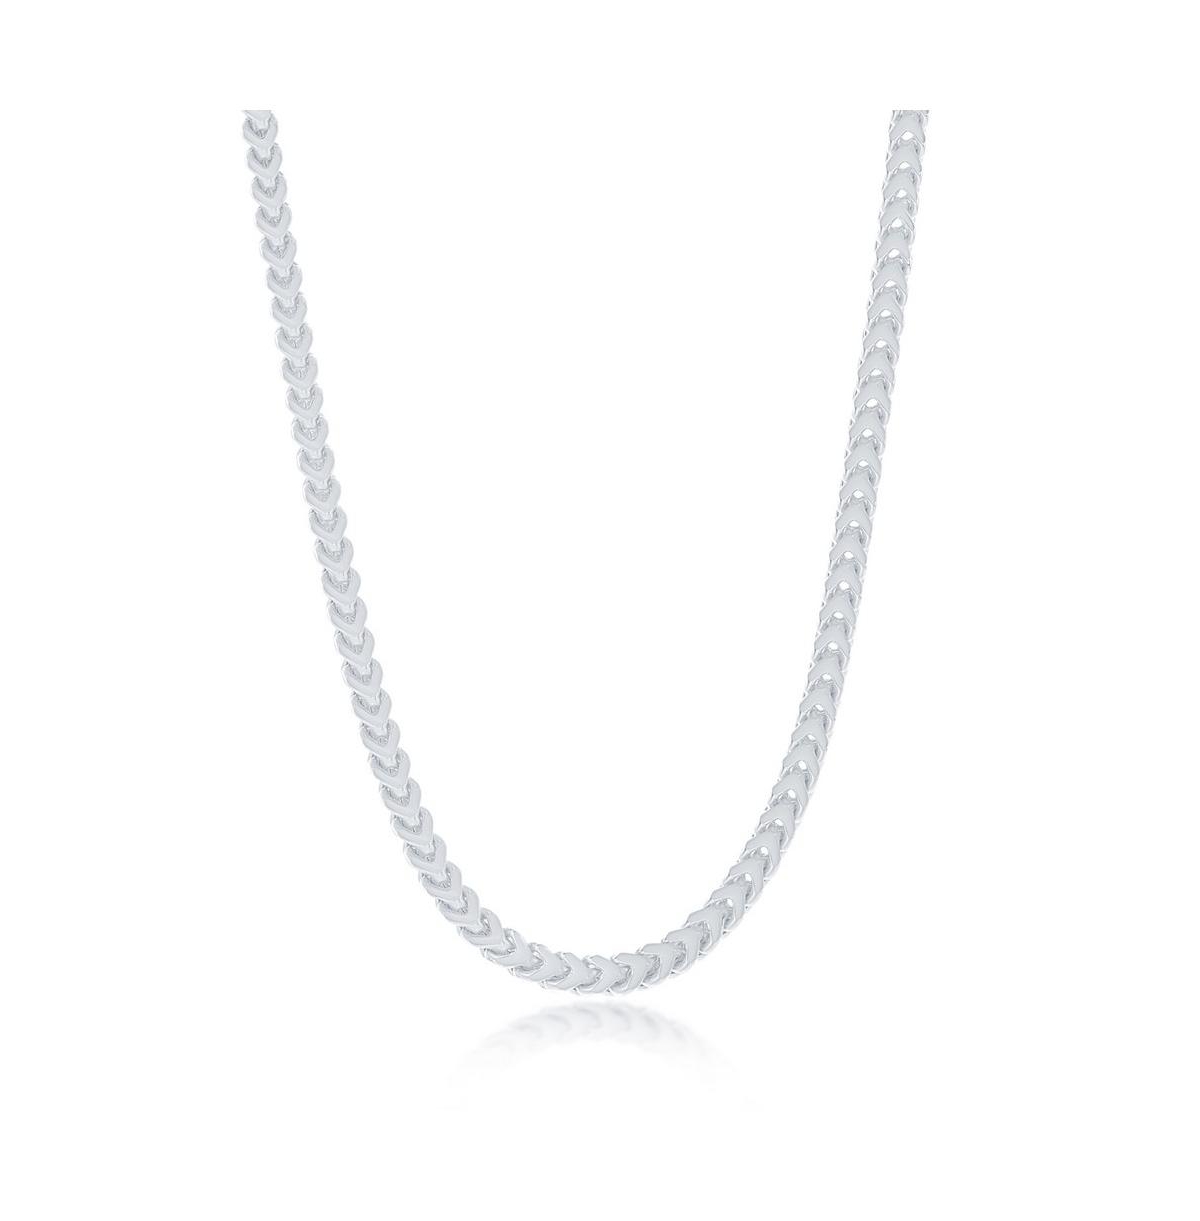 Franco Chain 3mm Sterling Silver or Gold Plated Over Sterling Silver 24" Necklace - Gold